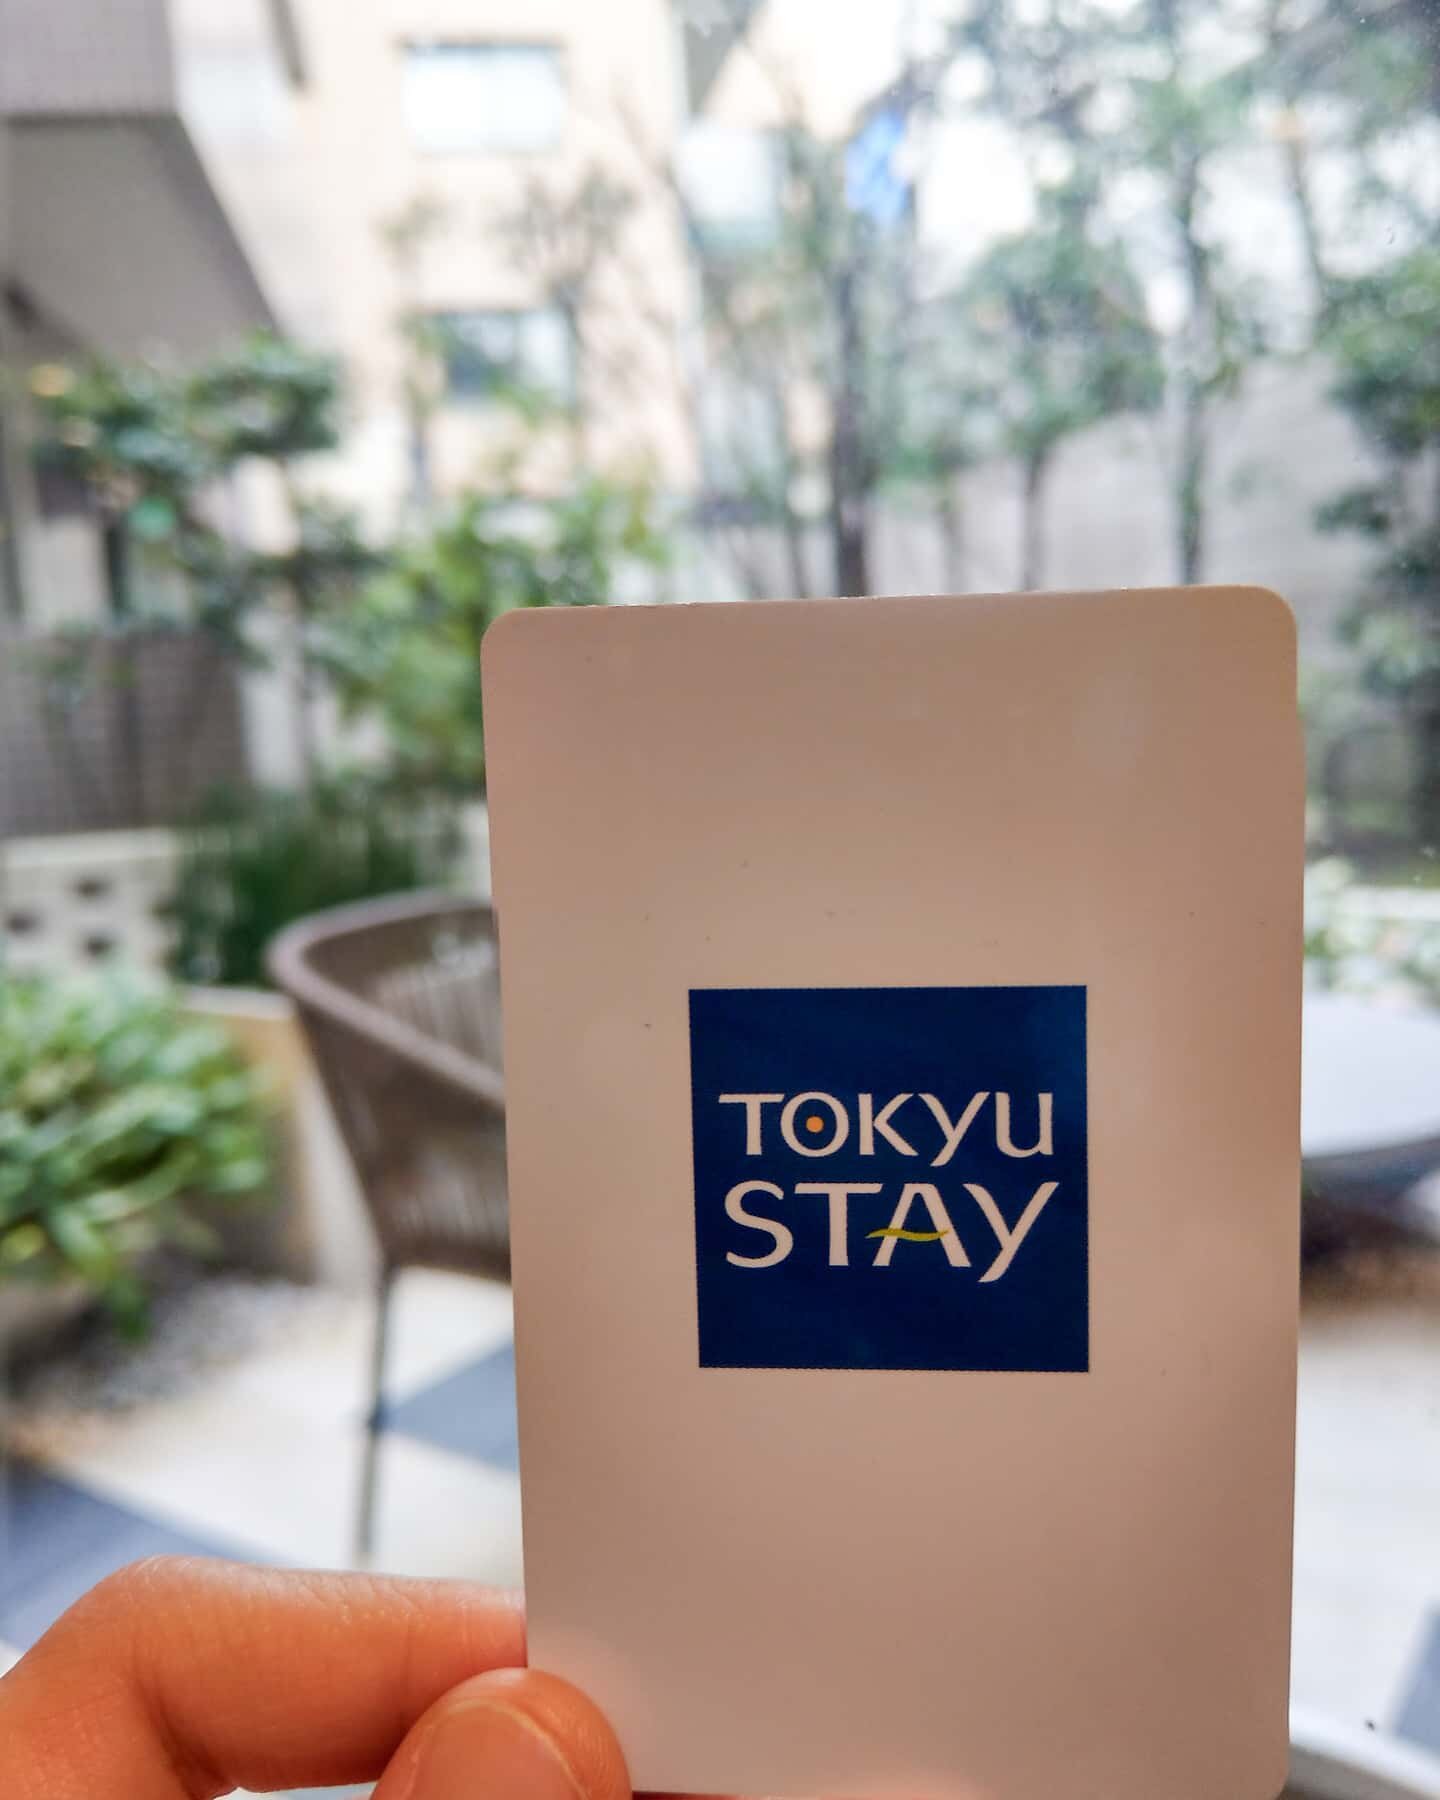 Nice stay @tokyustay_official 
Though the key card is...a direct one.
#photooftheday #cards #cardcollector #cardcollection #cardart #cardsofinstagram #carddesign #cardoftheday #igcardfam #design #travel #keycard #hotel #hotelroomkey #tokyu #🇯🇵 #設計 